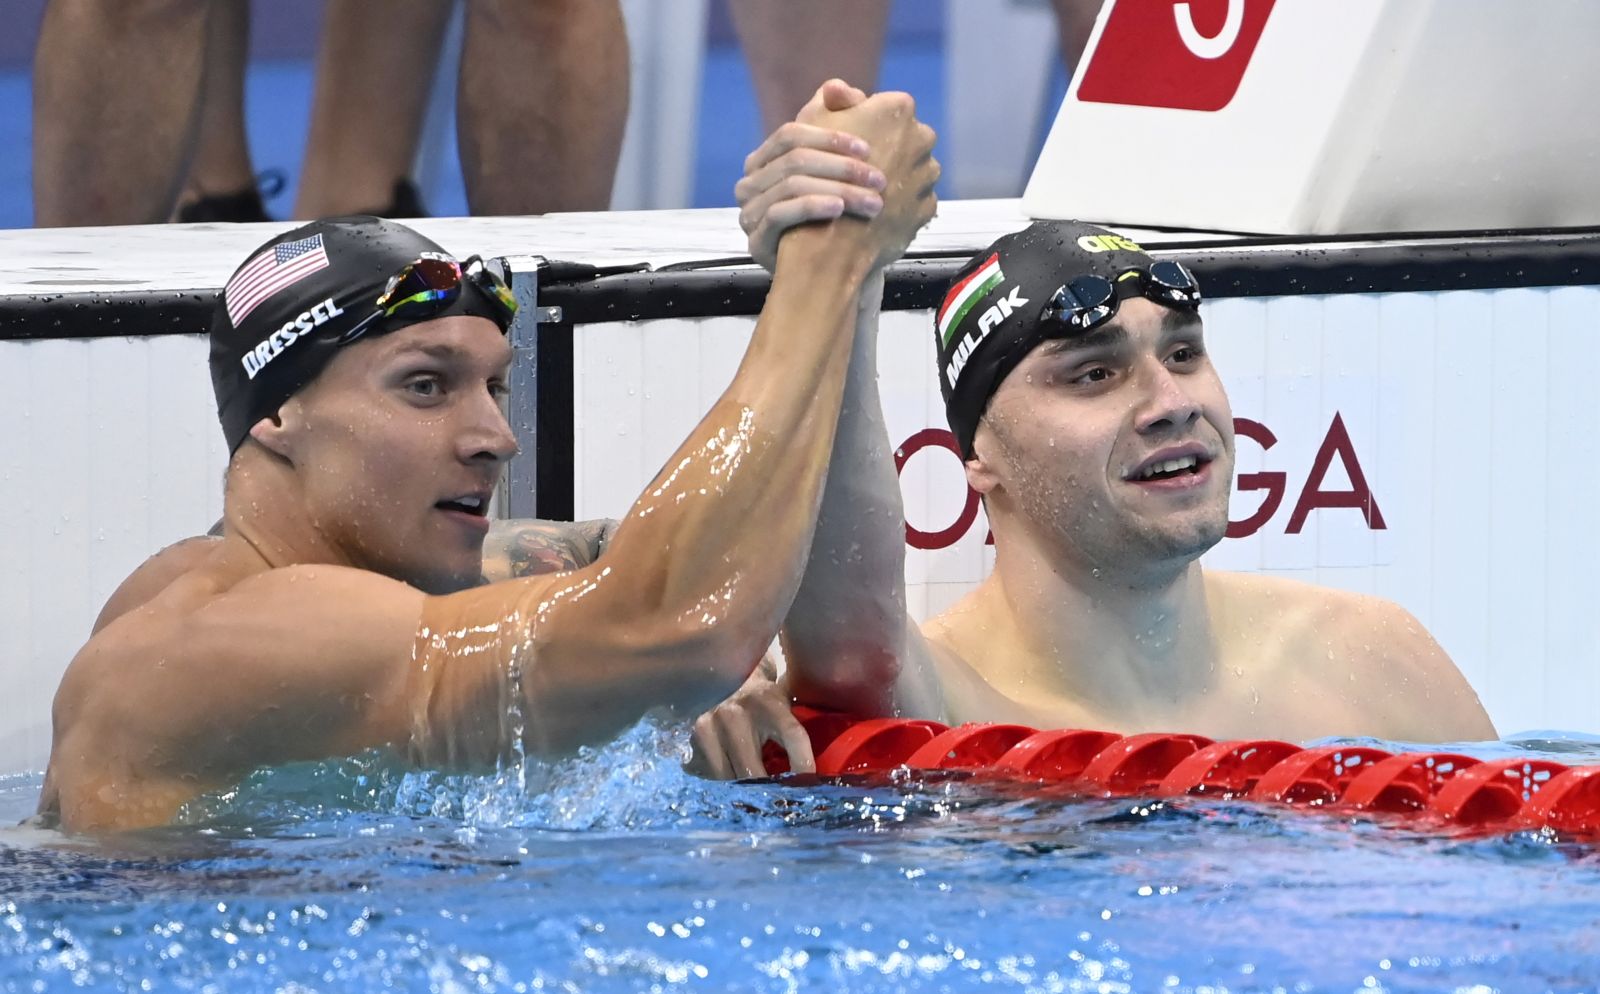 epa09381007 Gold medal winner Caeleb Dressel (L) of the USA and silver medal winner Kristof Milak (R) of Hungary celebrate after the final of men's 100m butterfly swimming event of the Tokyo 2020 Olympic Games at the Tokyo Aquatics Centre in Tokyo, Japan, 31 July 2021.  EPA/Tamas Kovacs HUNGARY OUT